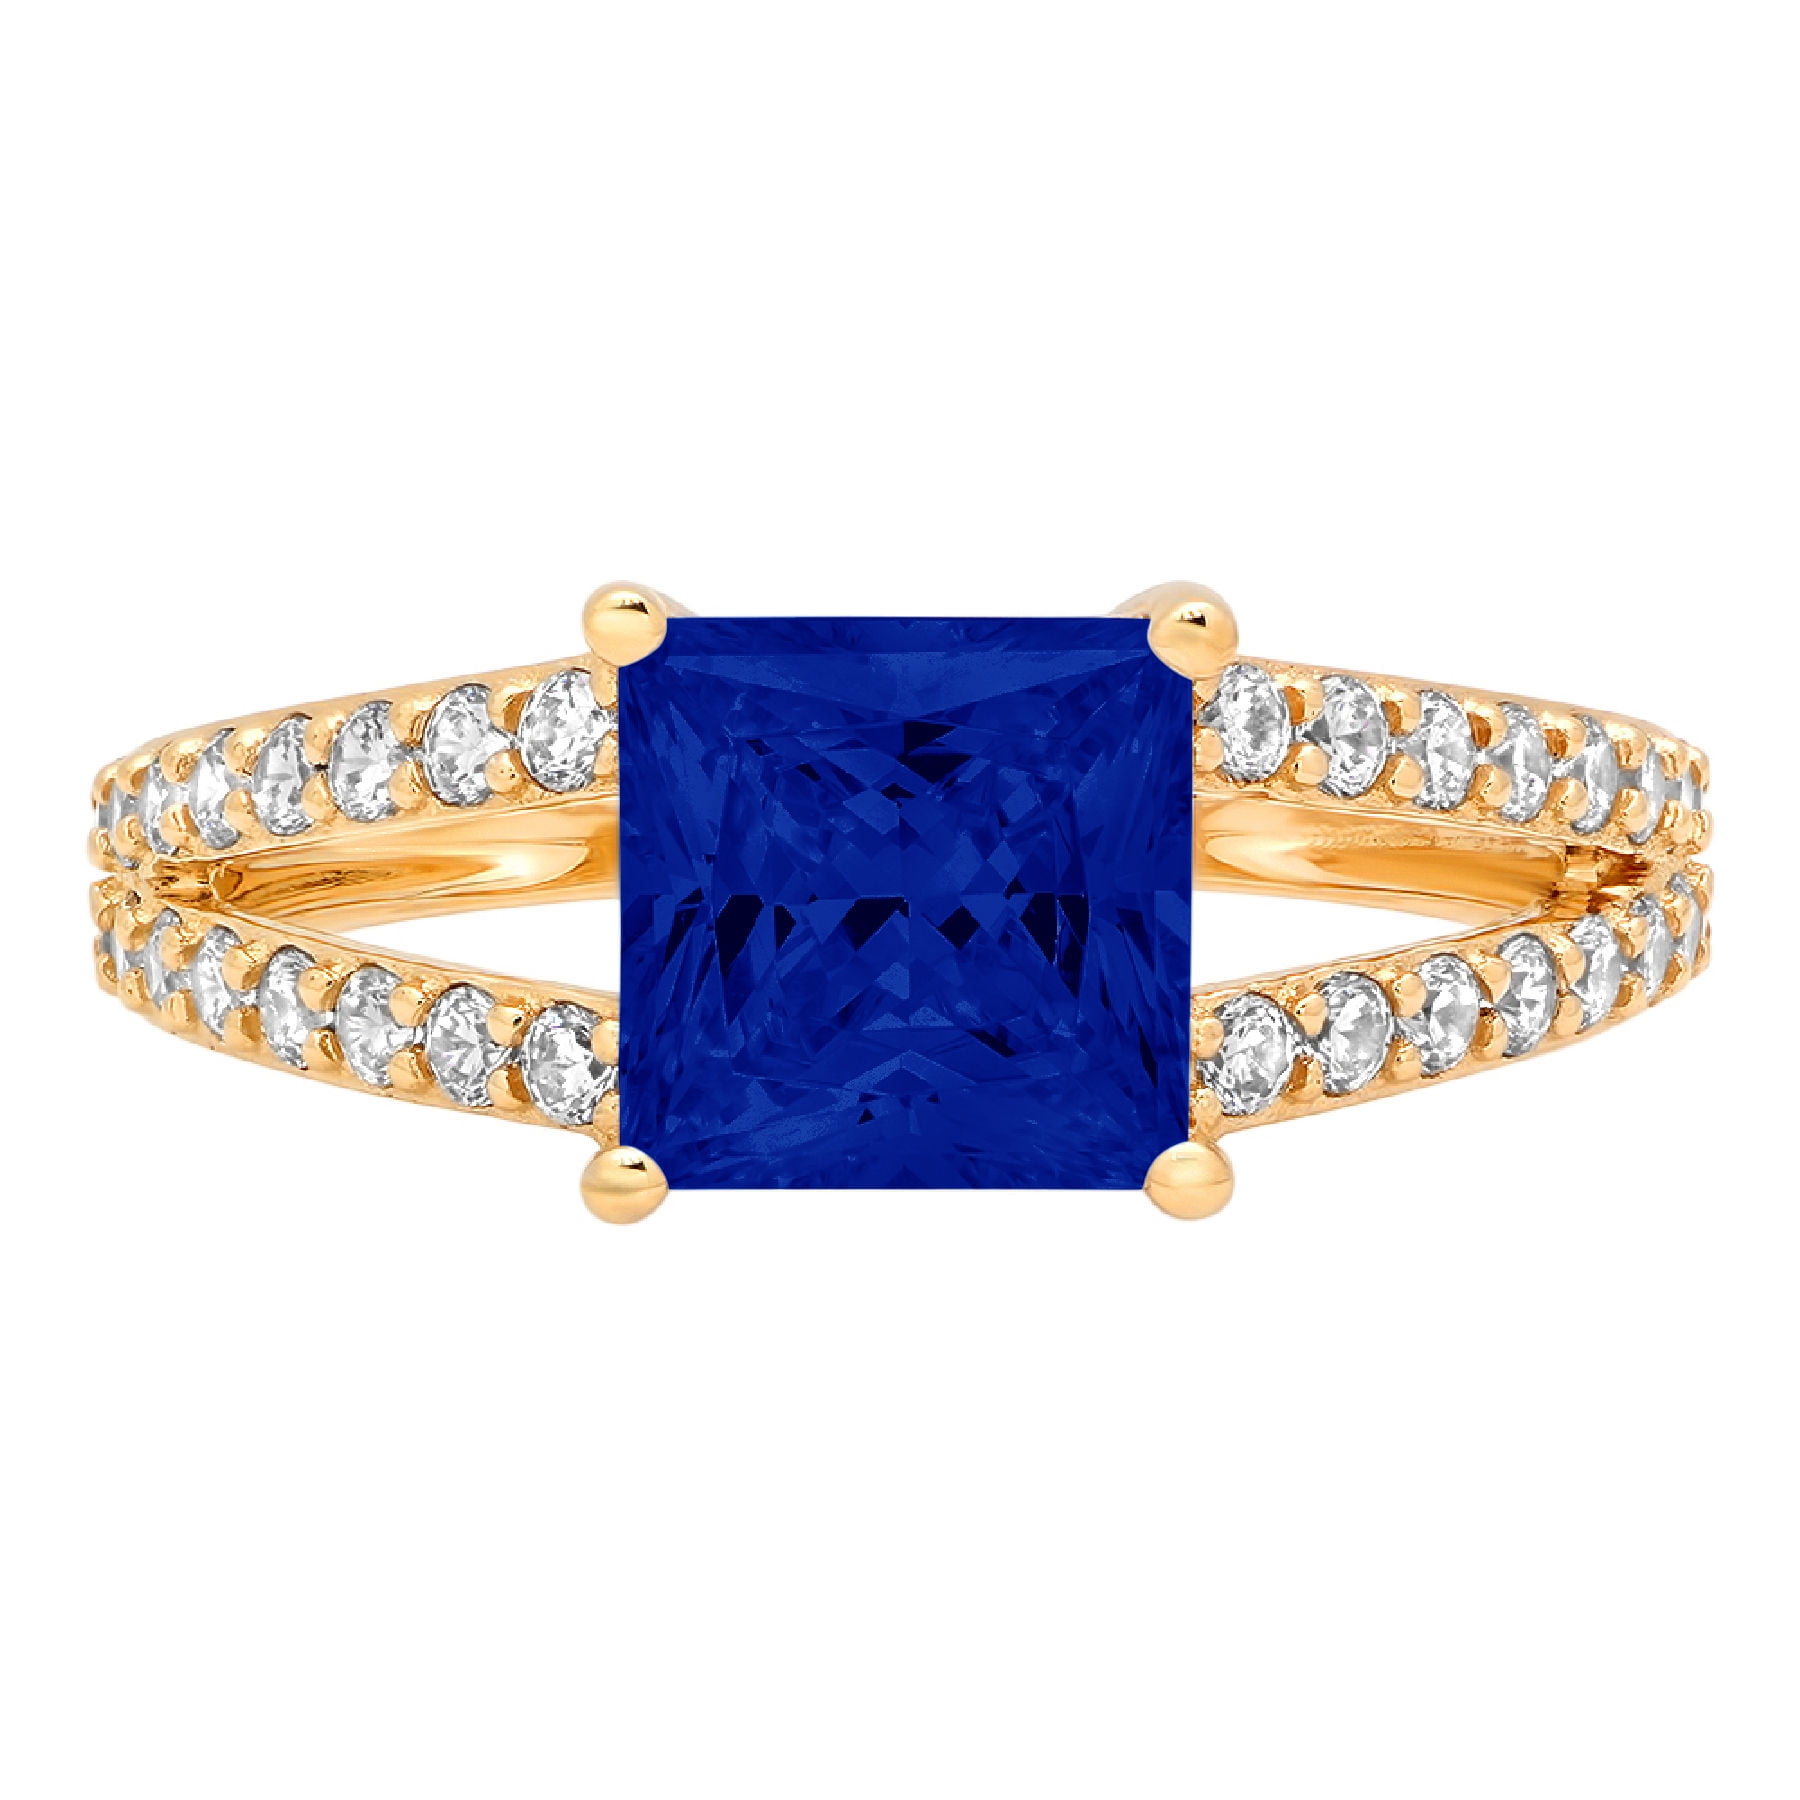 Details about   4 Ct Princess Cut Blue Sapphire 14K Yellow Gold Over Engagement Vintage Ring 